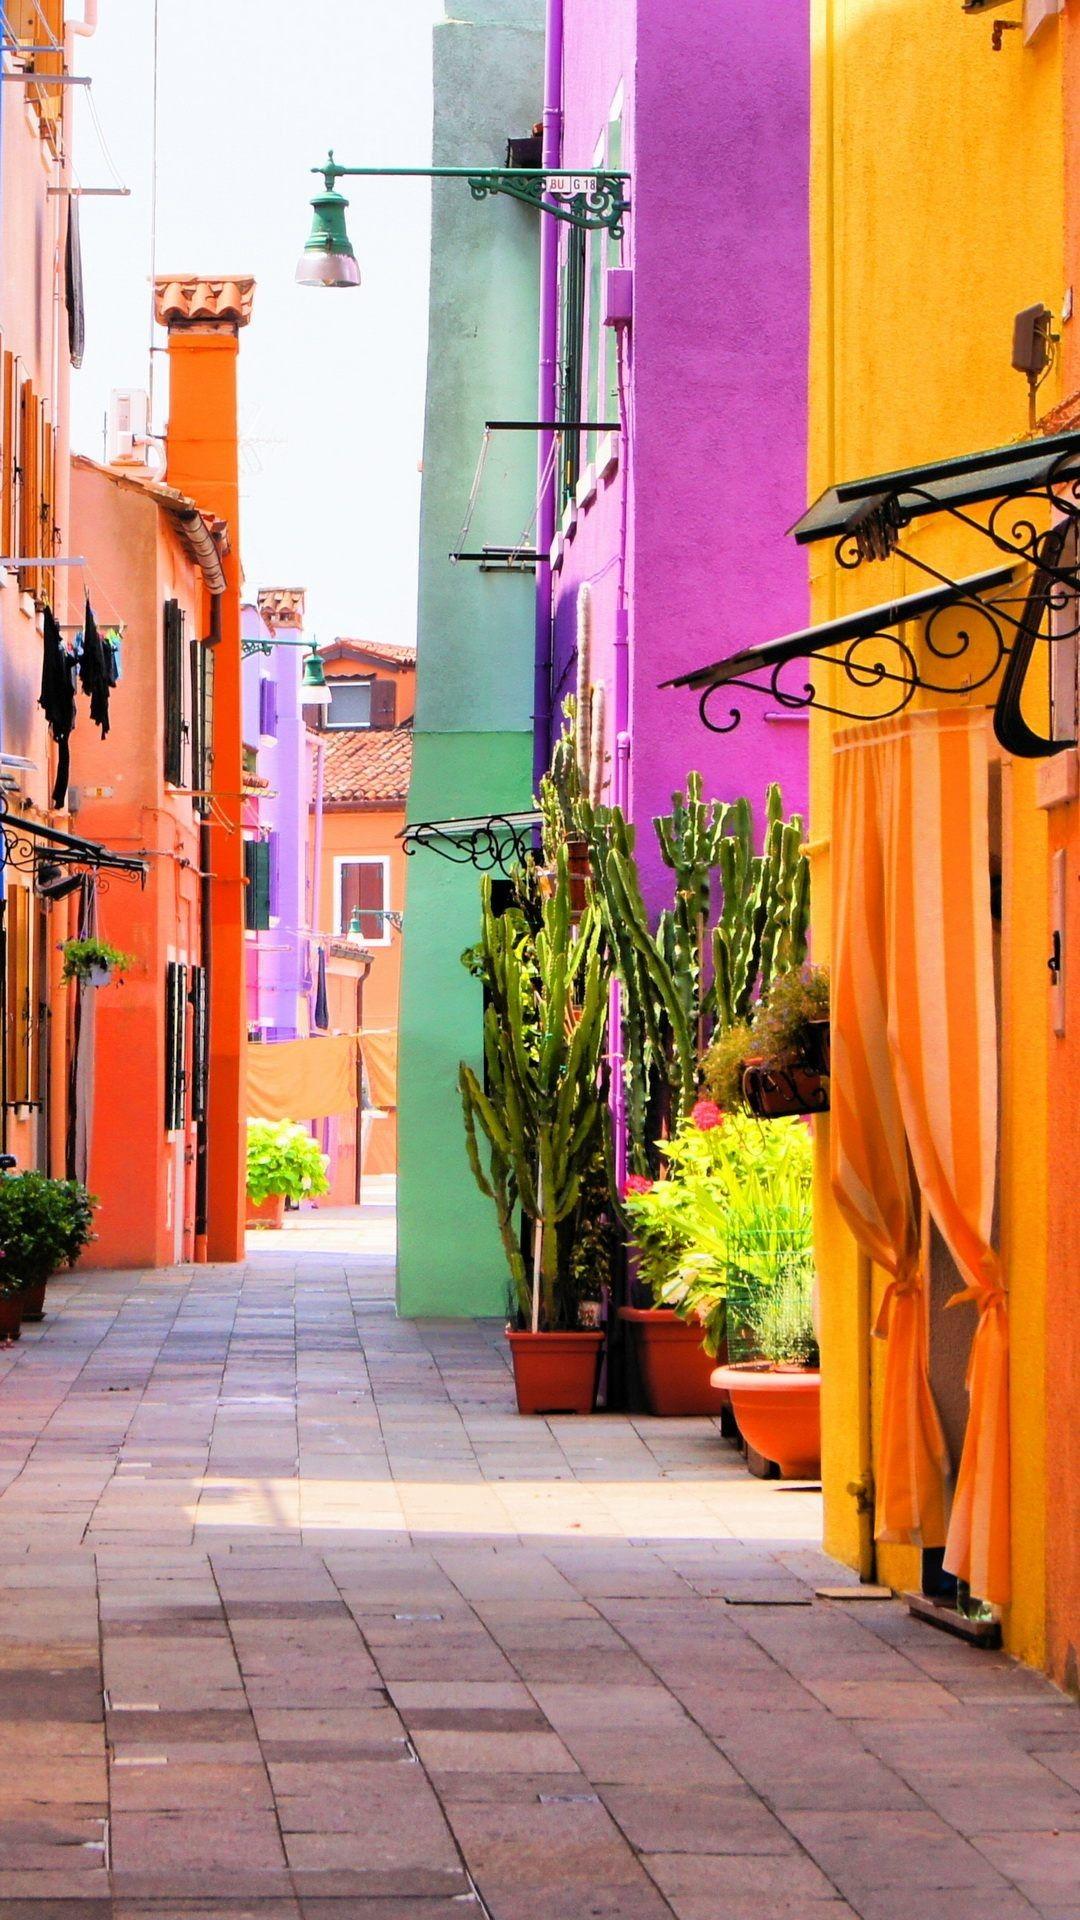 Colorful Italy Street Multicolored Houses Android Wallpaper free download